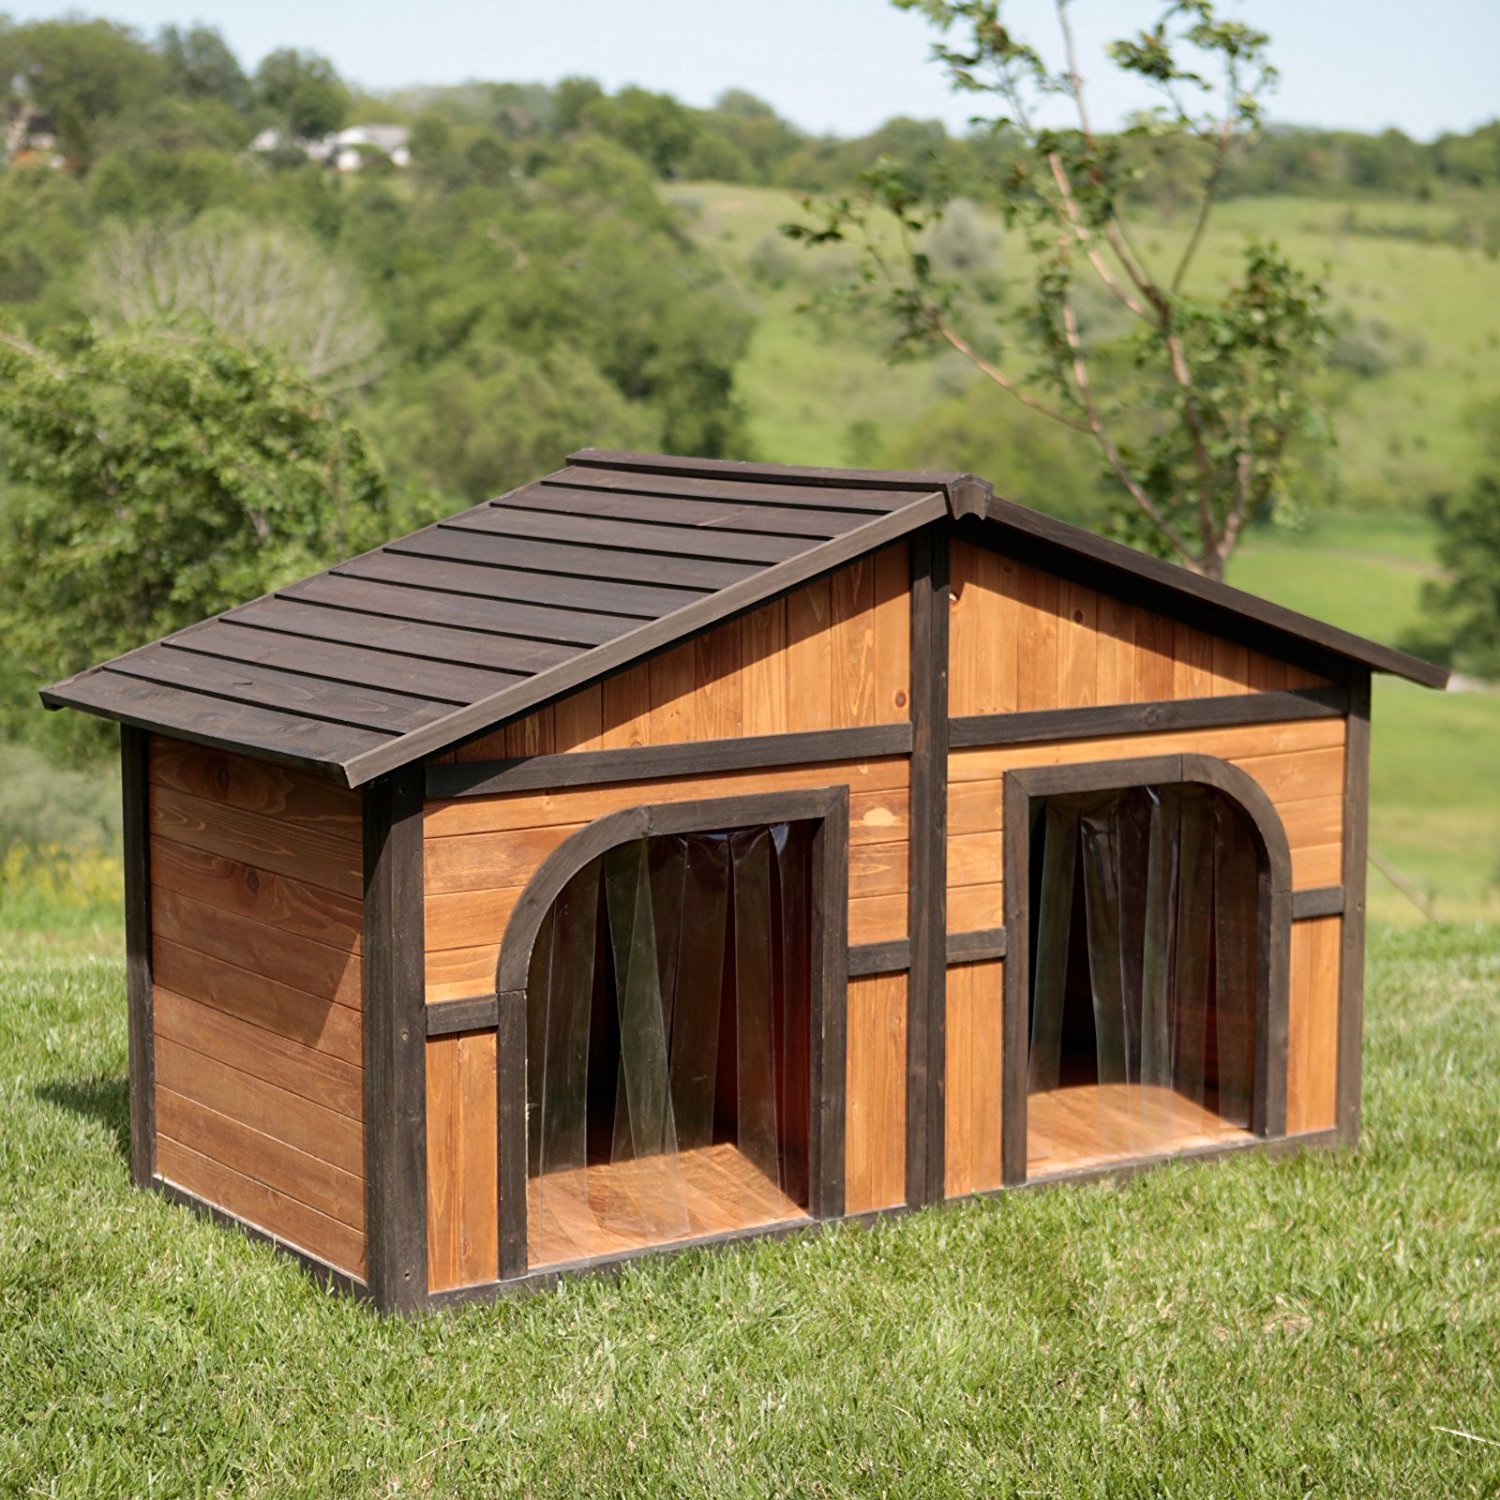 Extra Large Double Dog House Wood Duplex Outdoor Pet Shelter Kennel XL